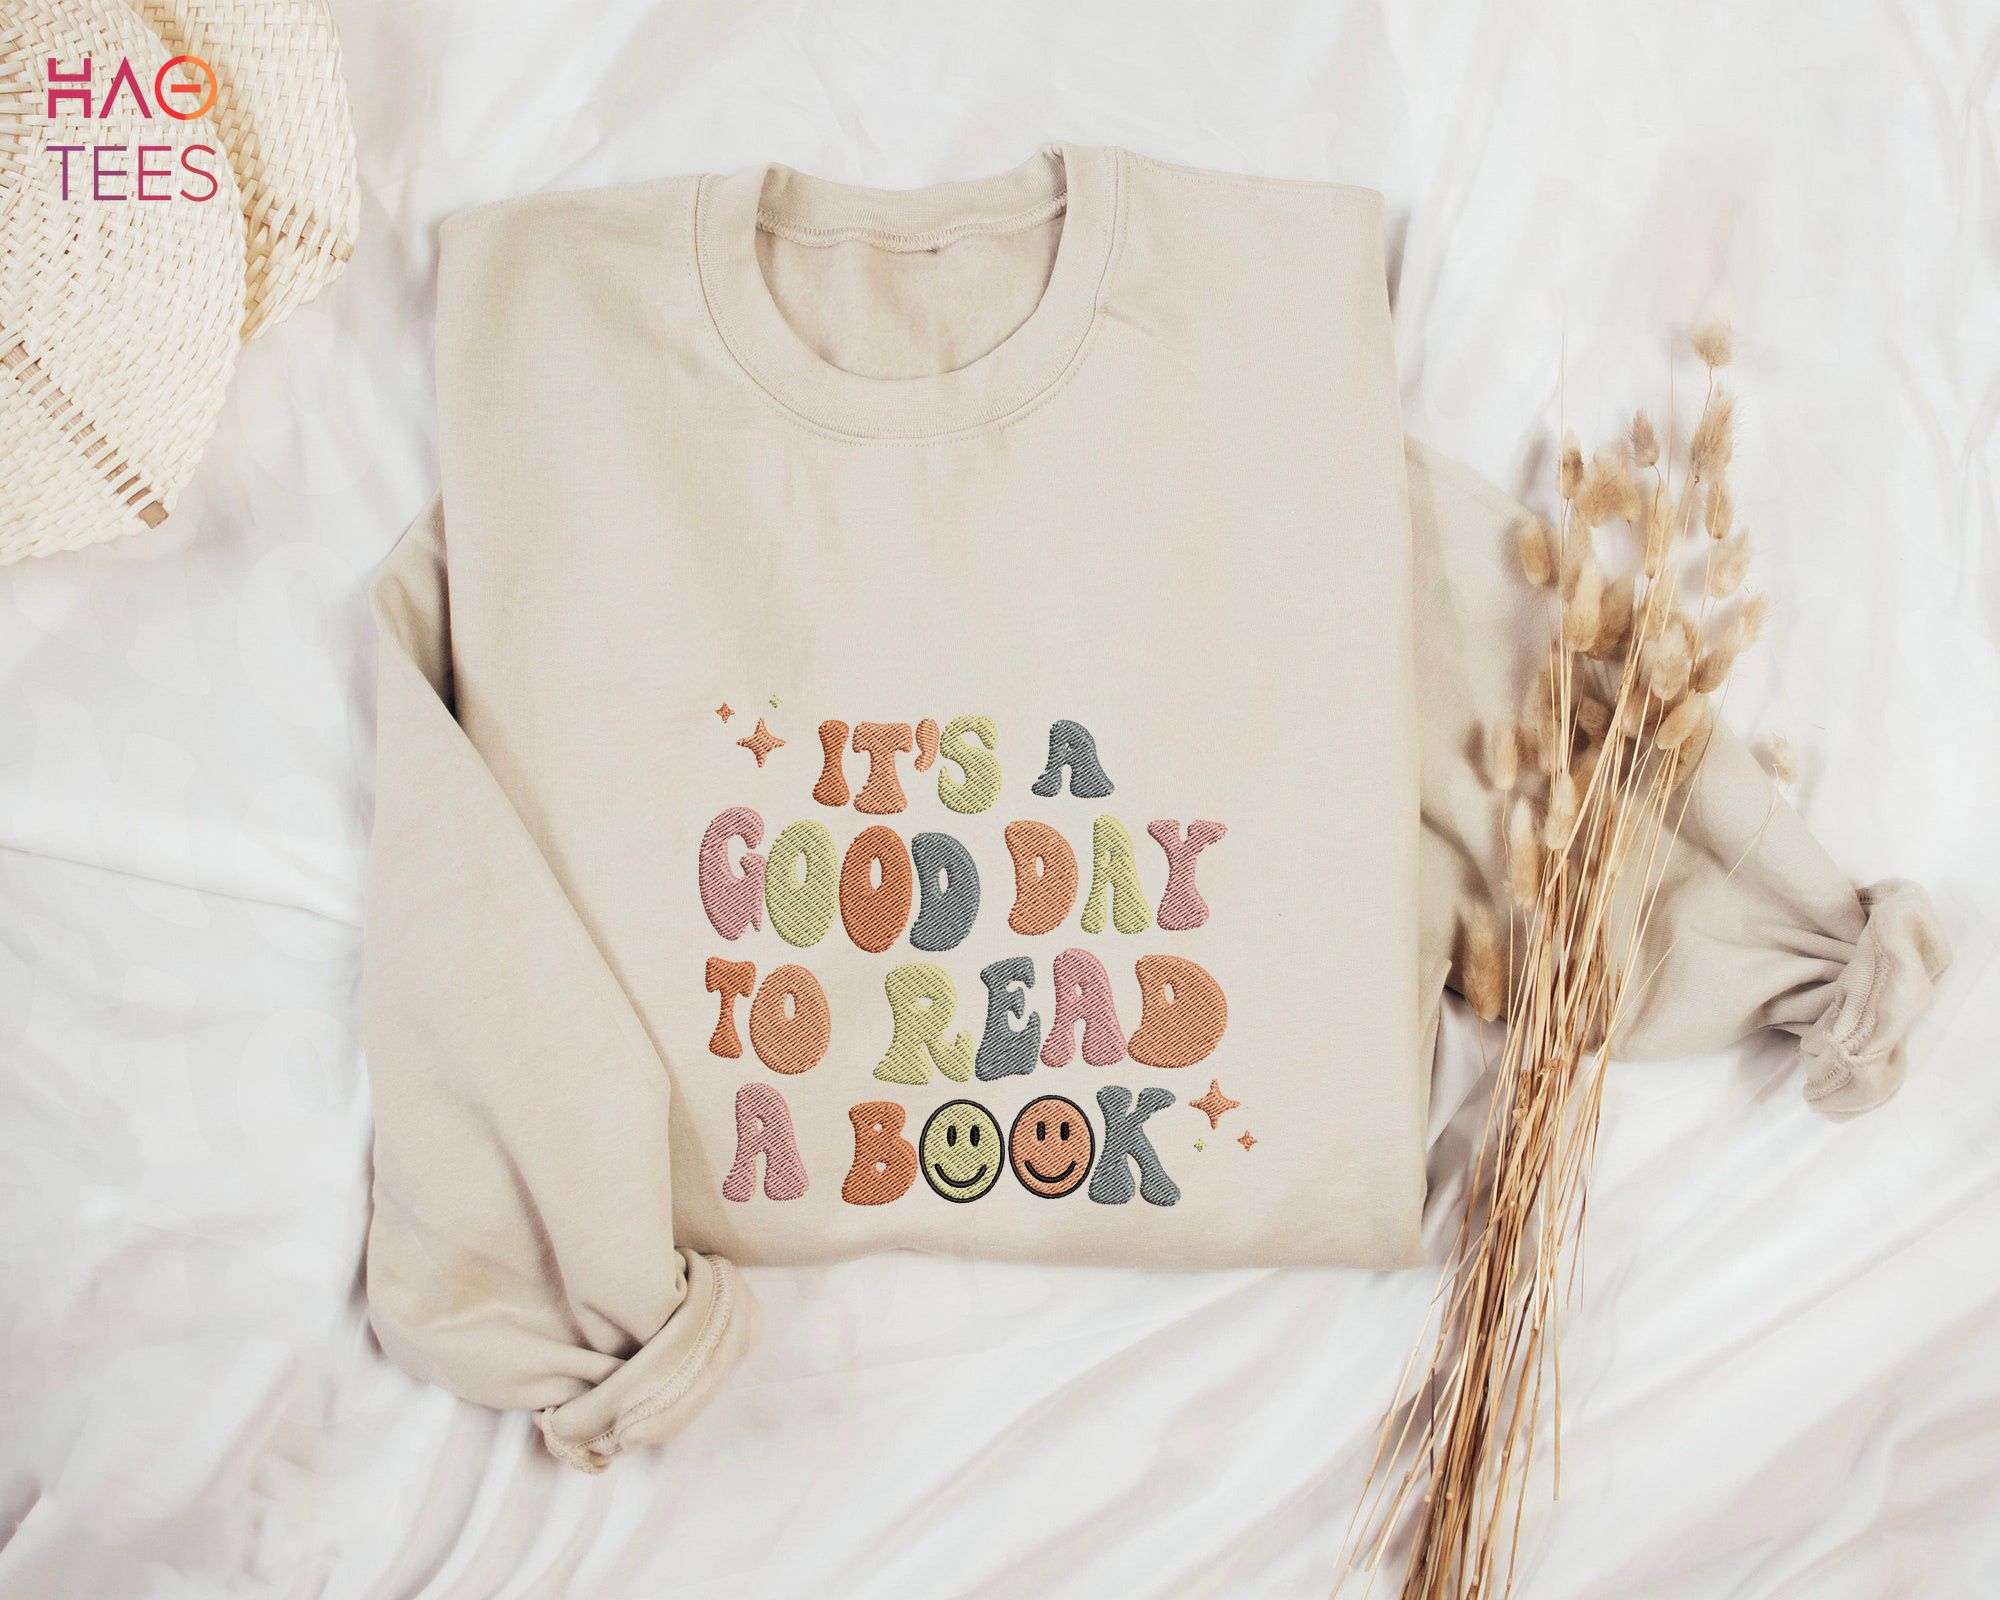 Its A Good Day To Read A Book Embroidered Bookish Librarian Teacher Gifts Literature Book Shirt